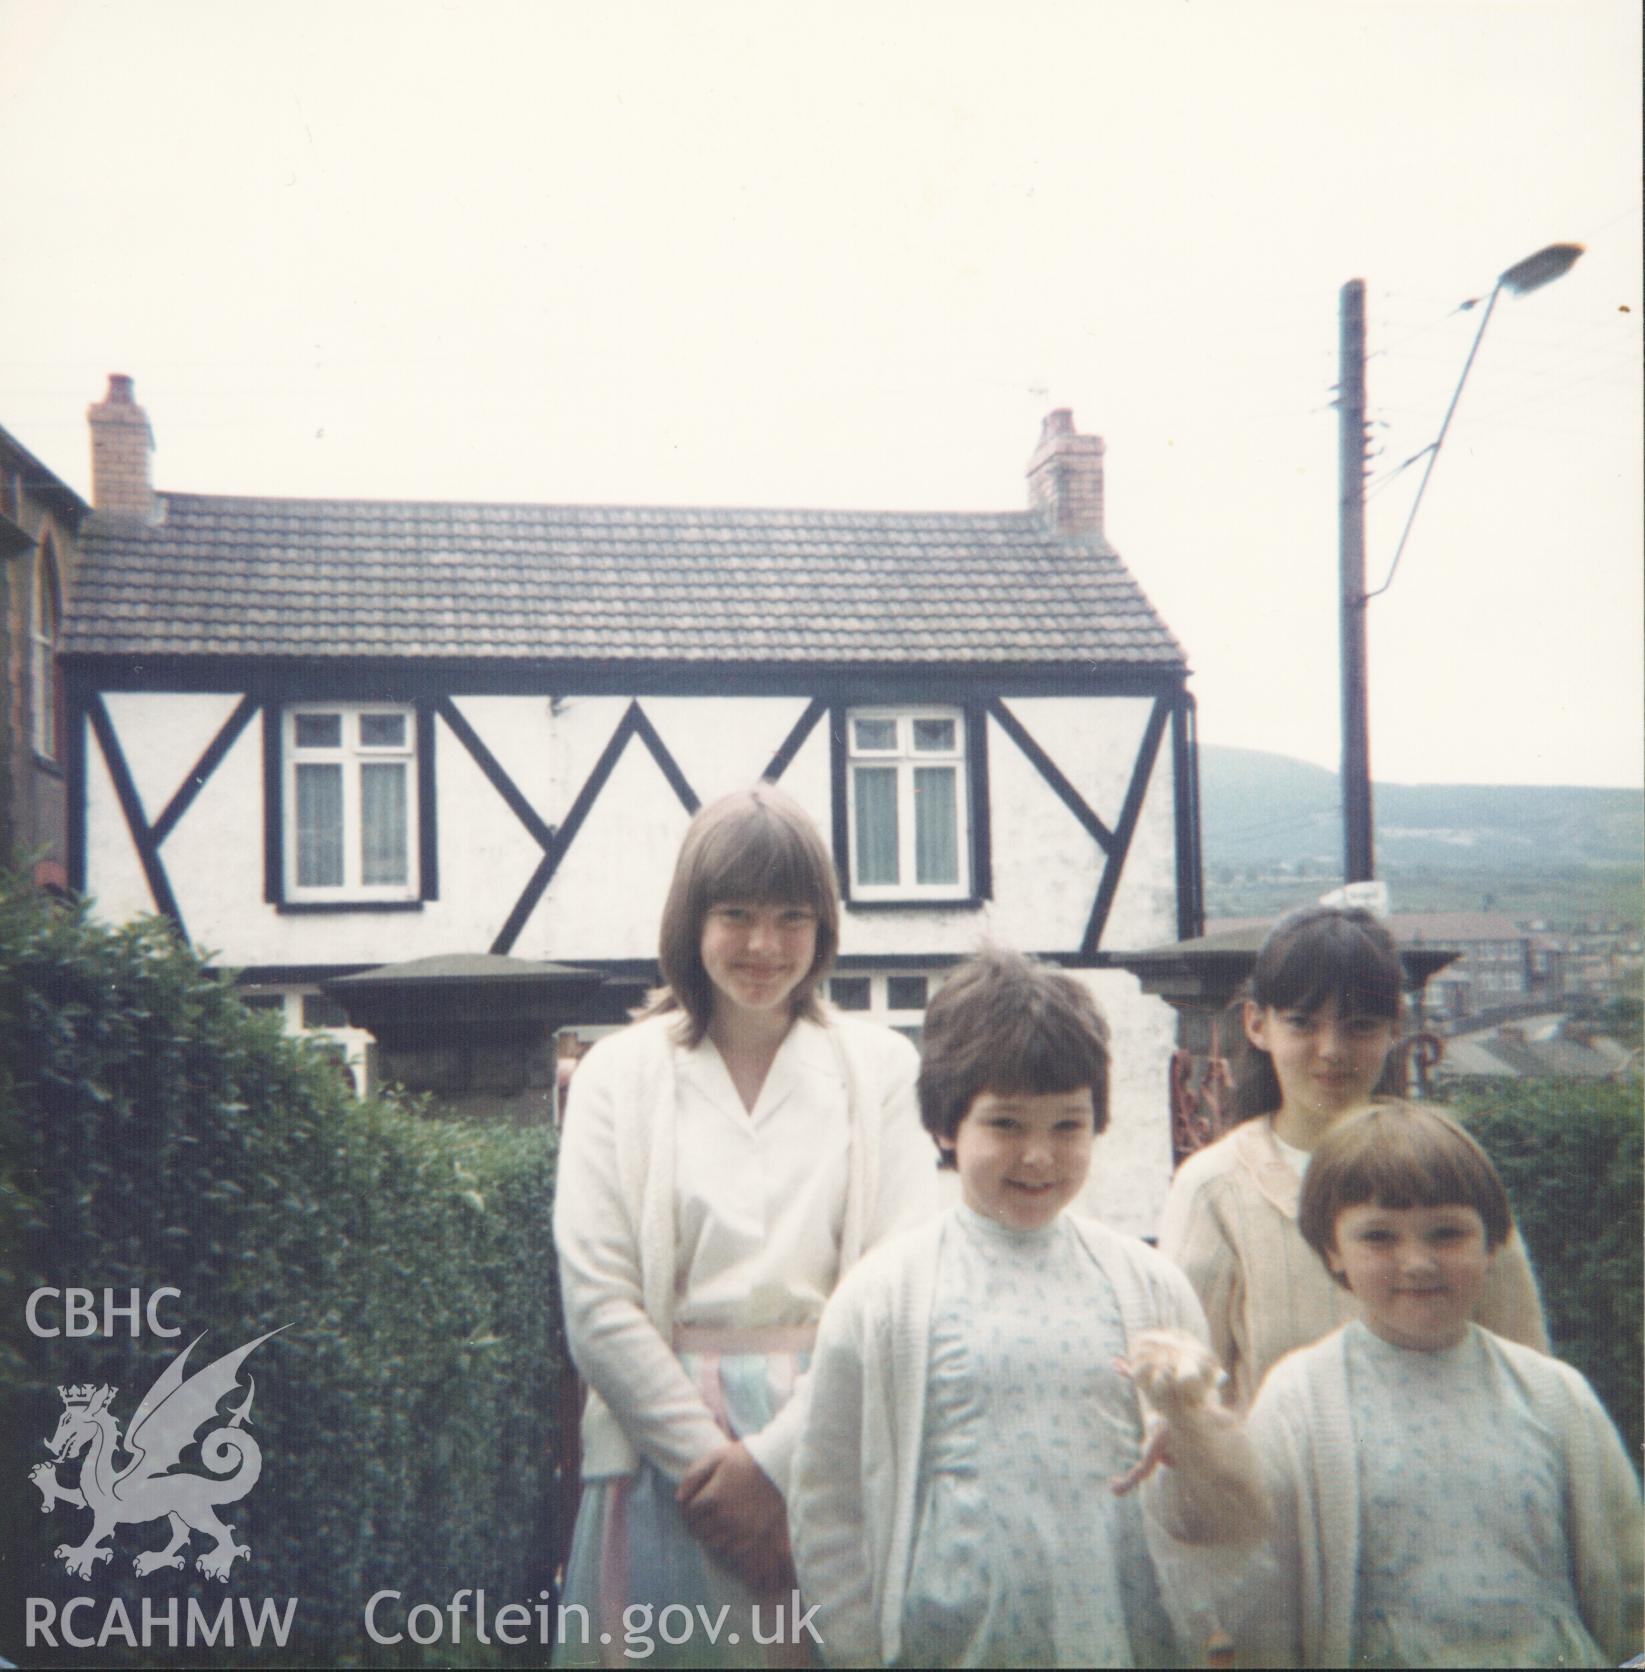 Colour photograph of young members of Bethania chapel congregation on the way to chapel, 26th March 1985. Donated to the RCAHMW by Cyril Philips as part of the Digital Dissent Project.